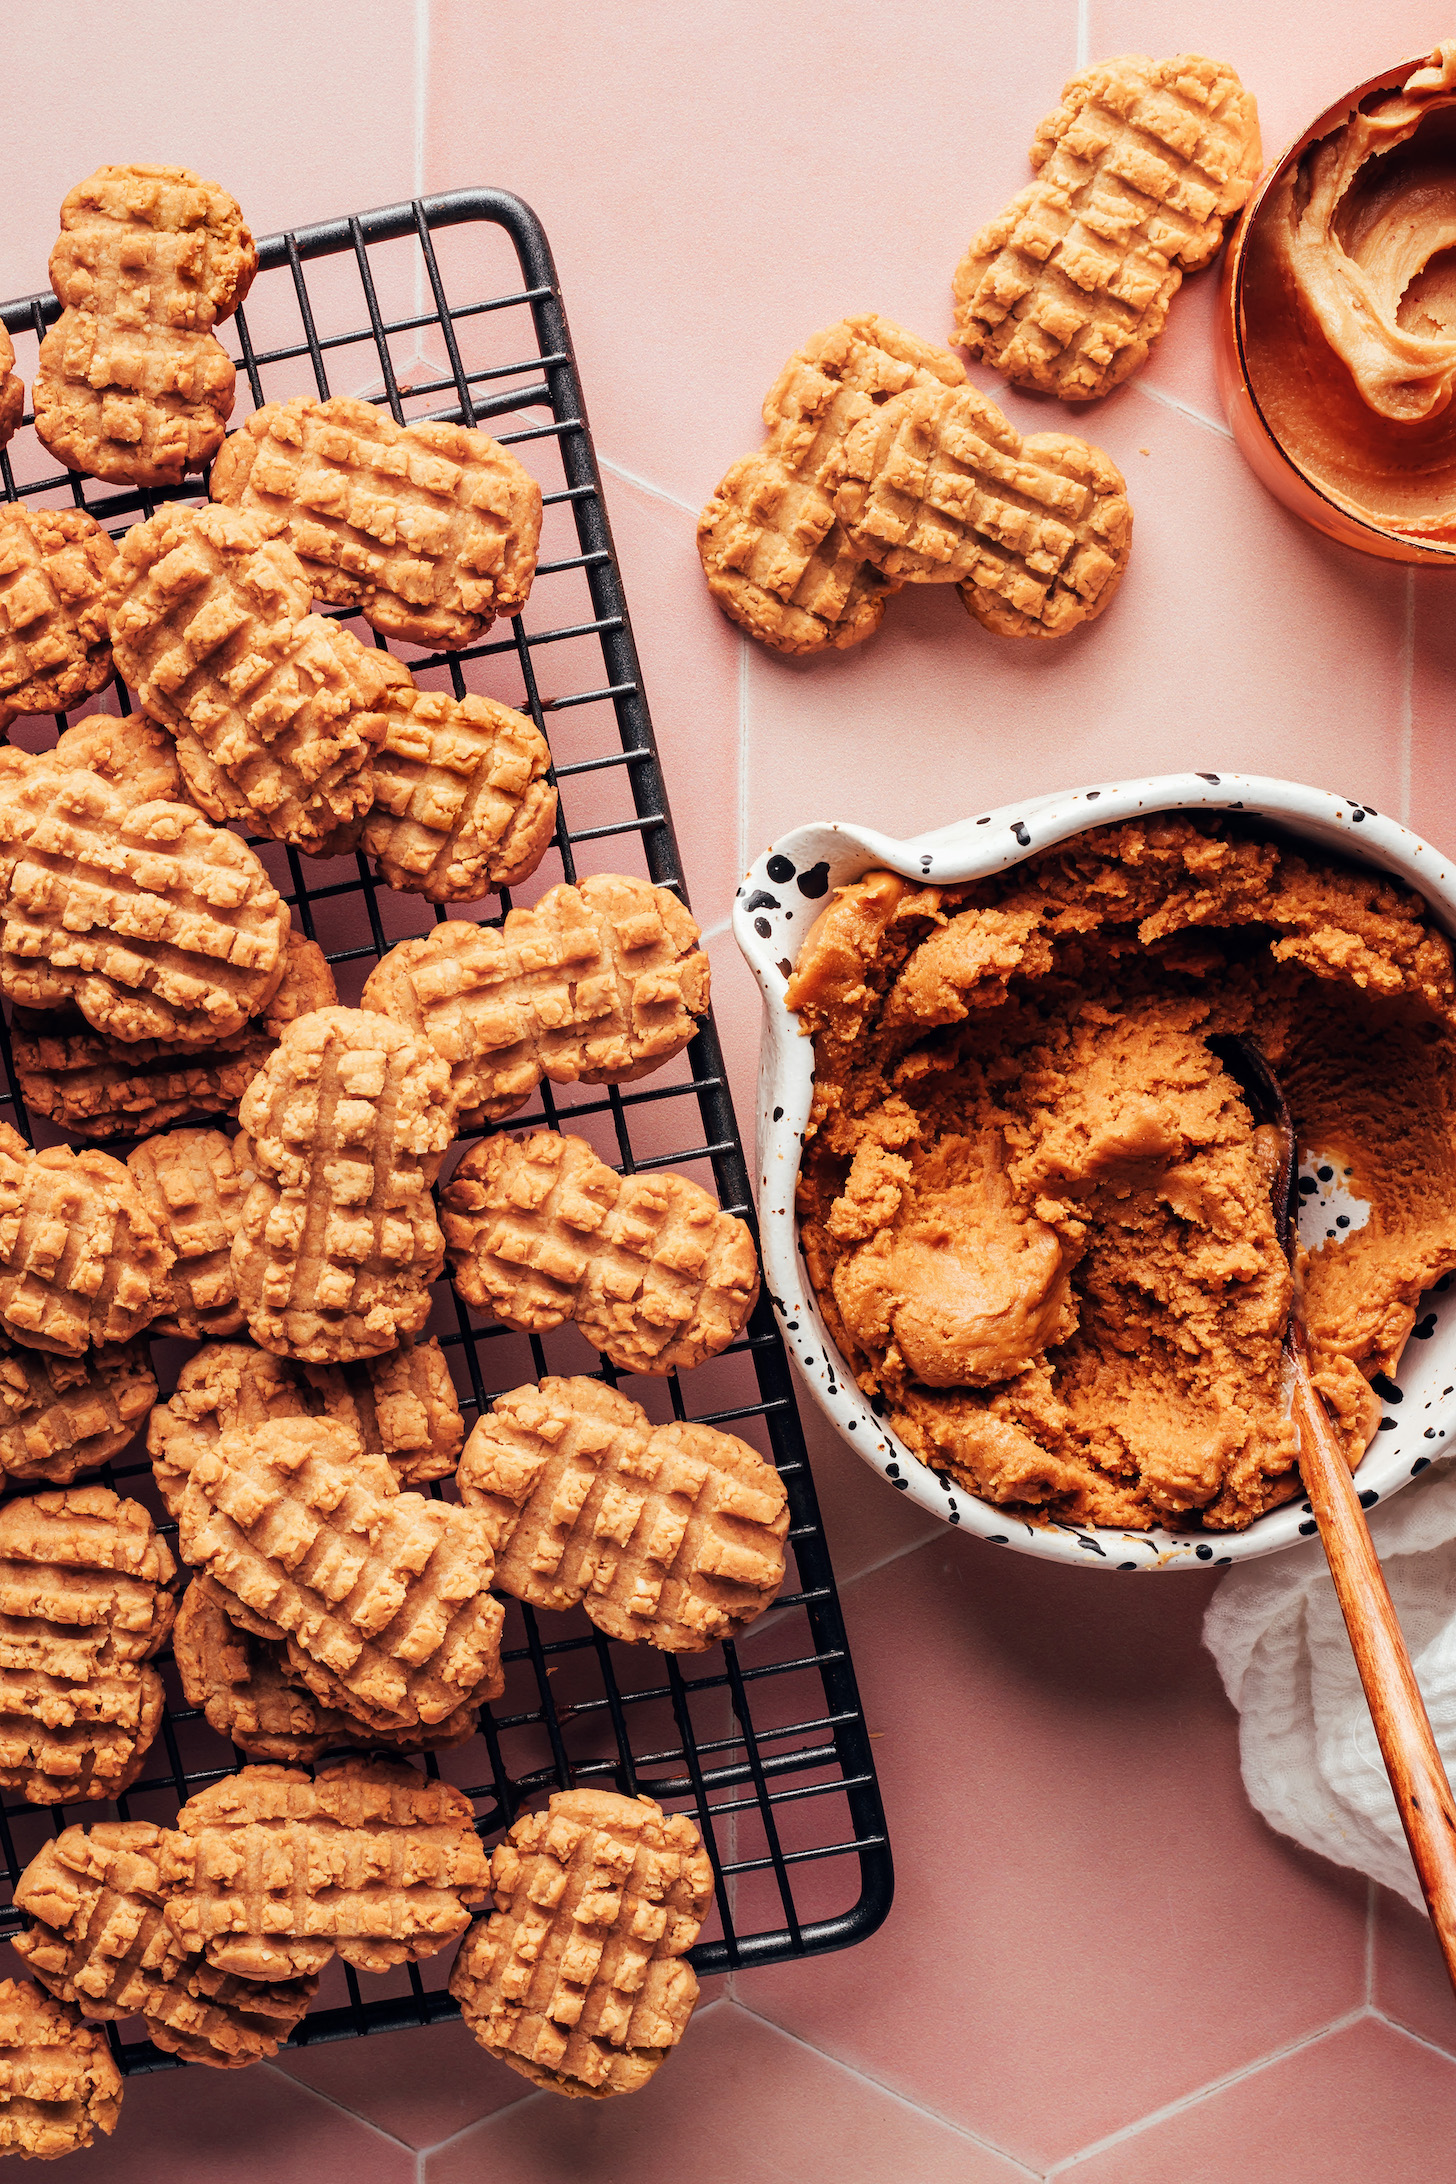 Peanut butter cookies and filling to make vegan gluten-free nutter butters